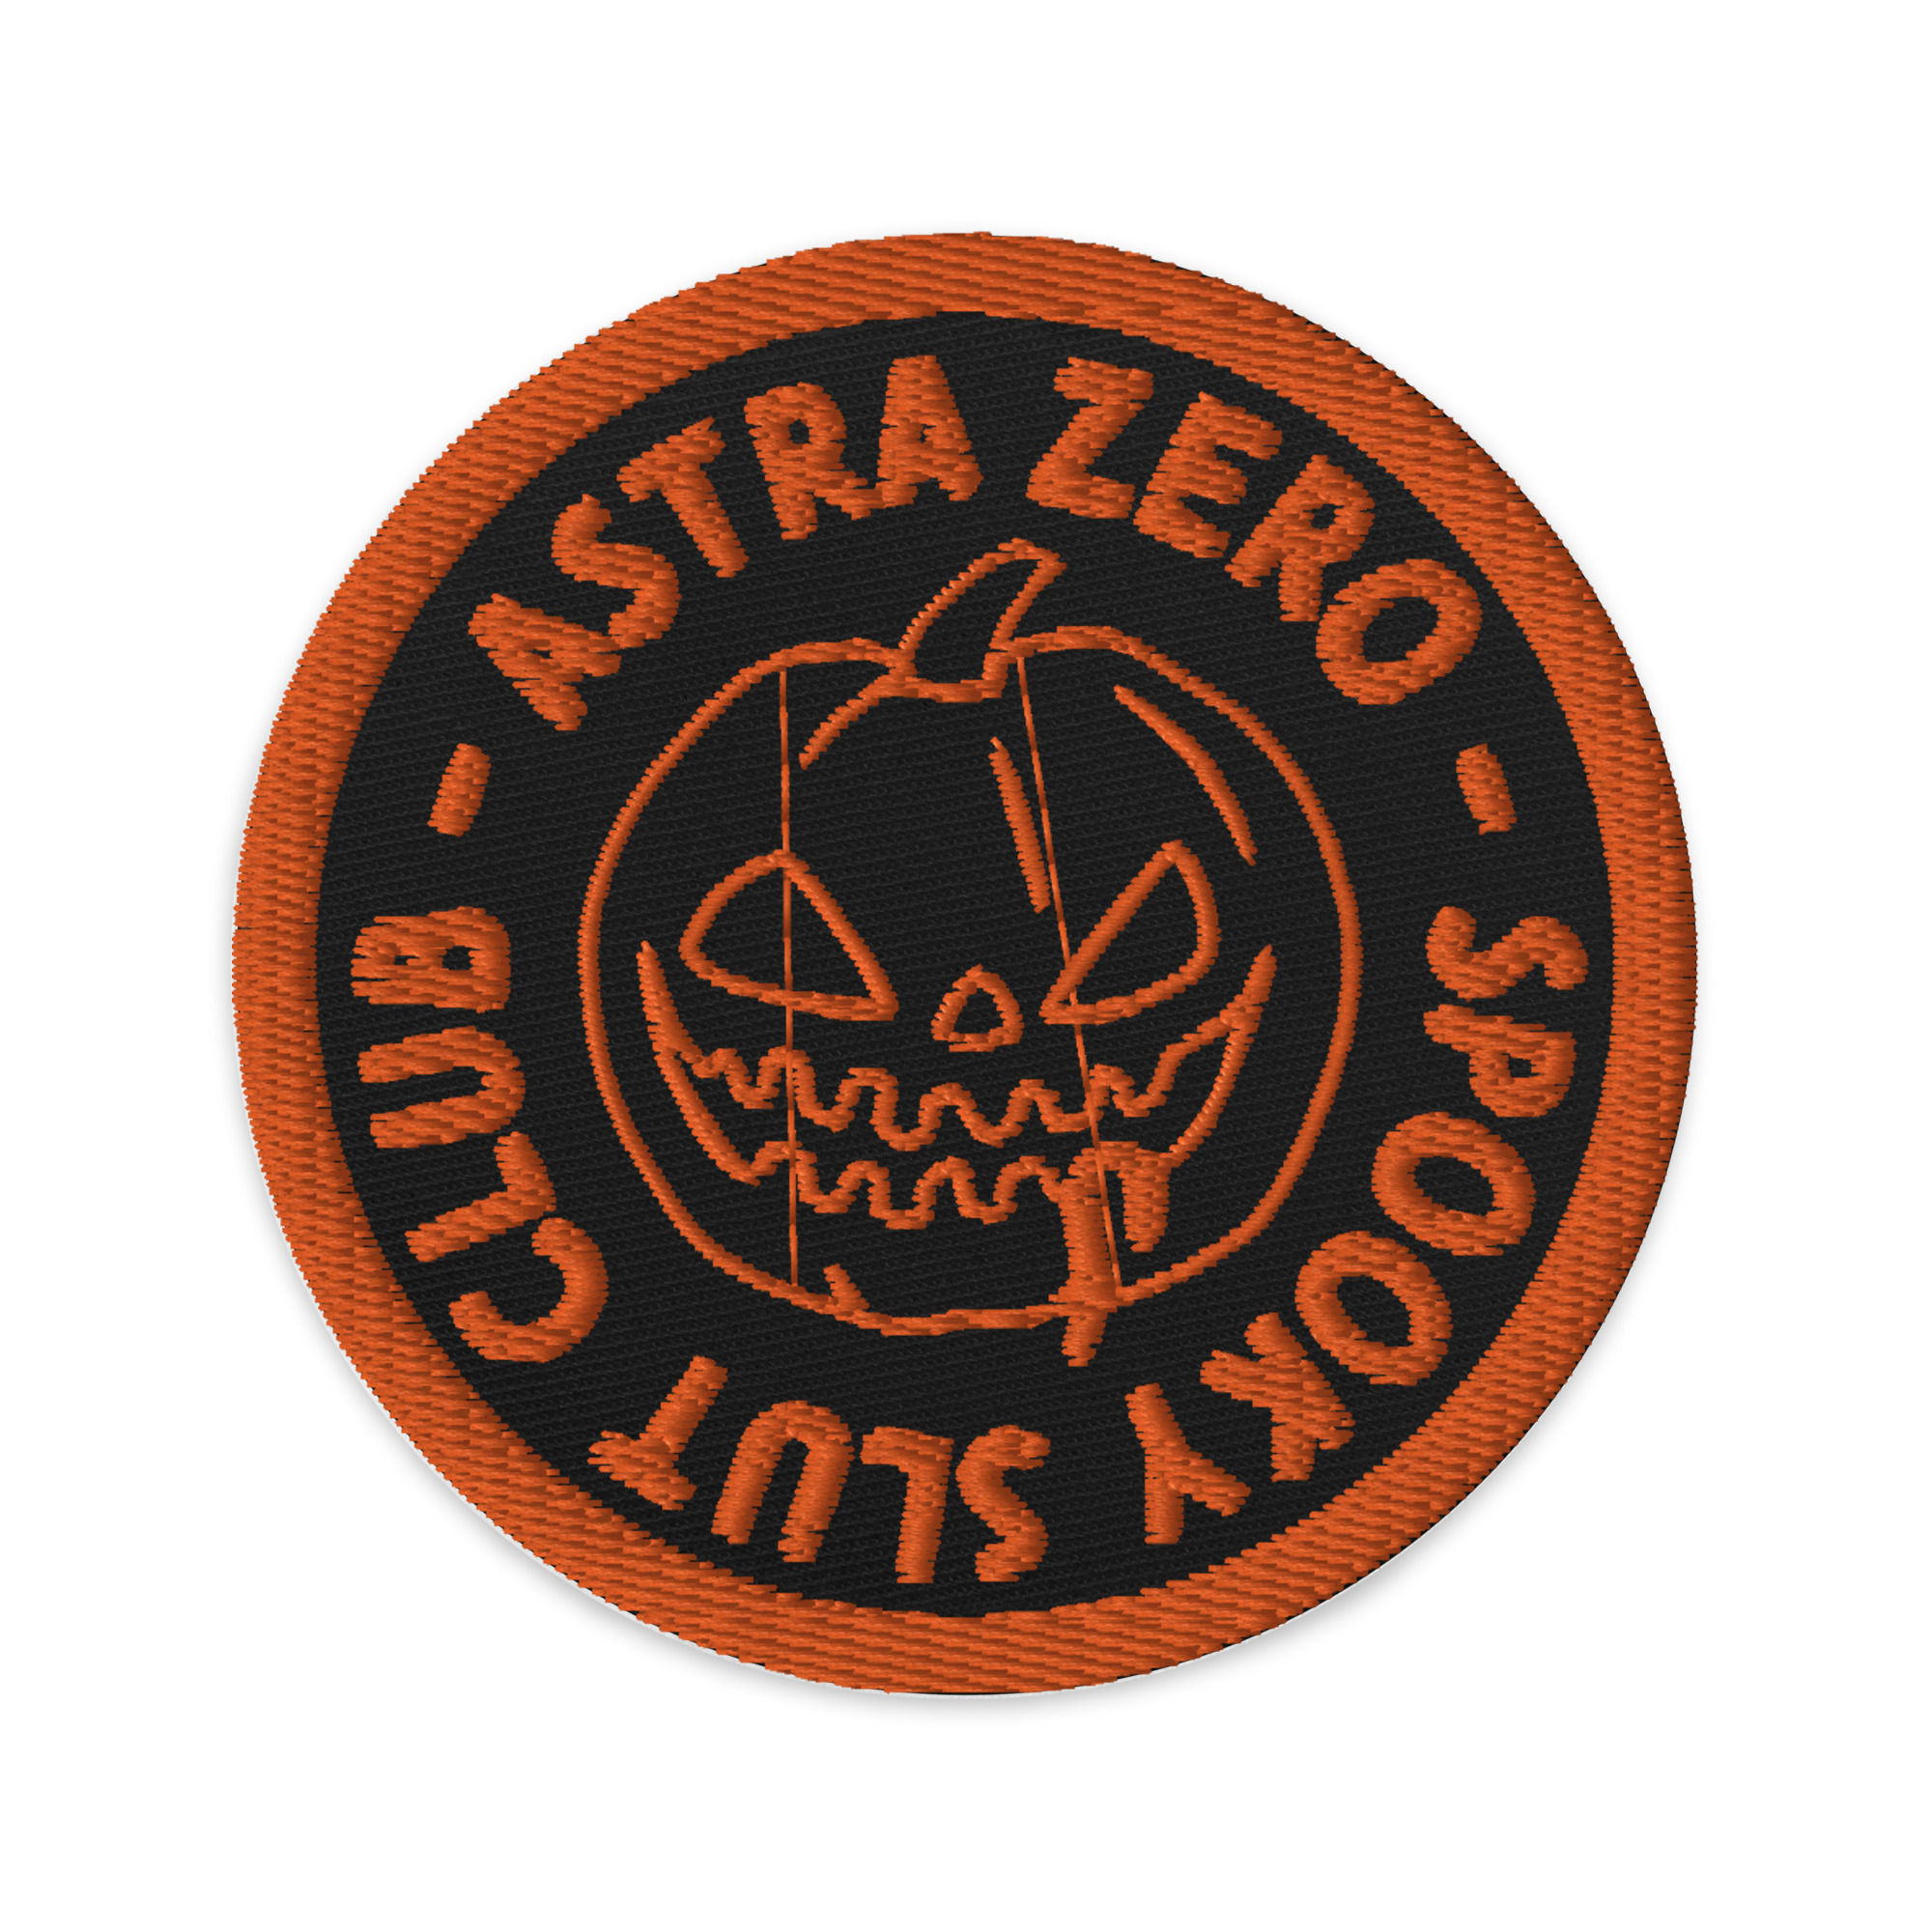 Featured image for “Spooky Sl*t club - Embroidered patches”